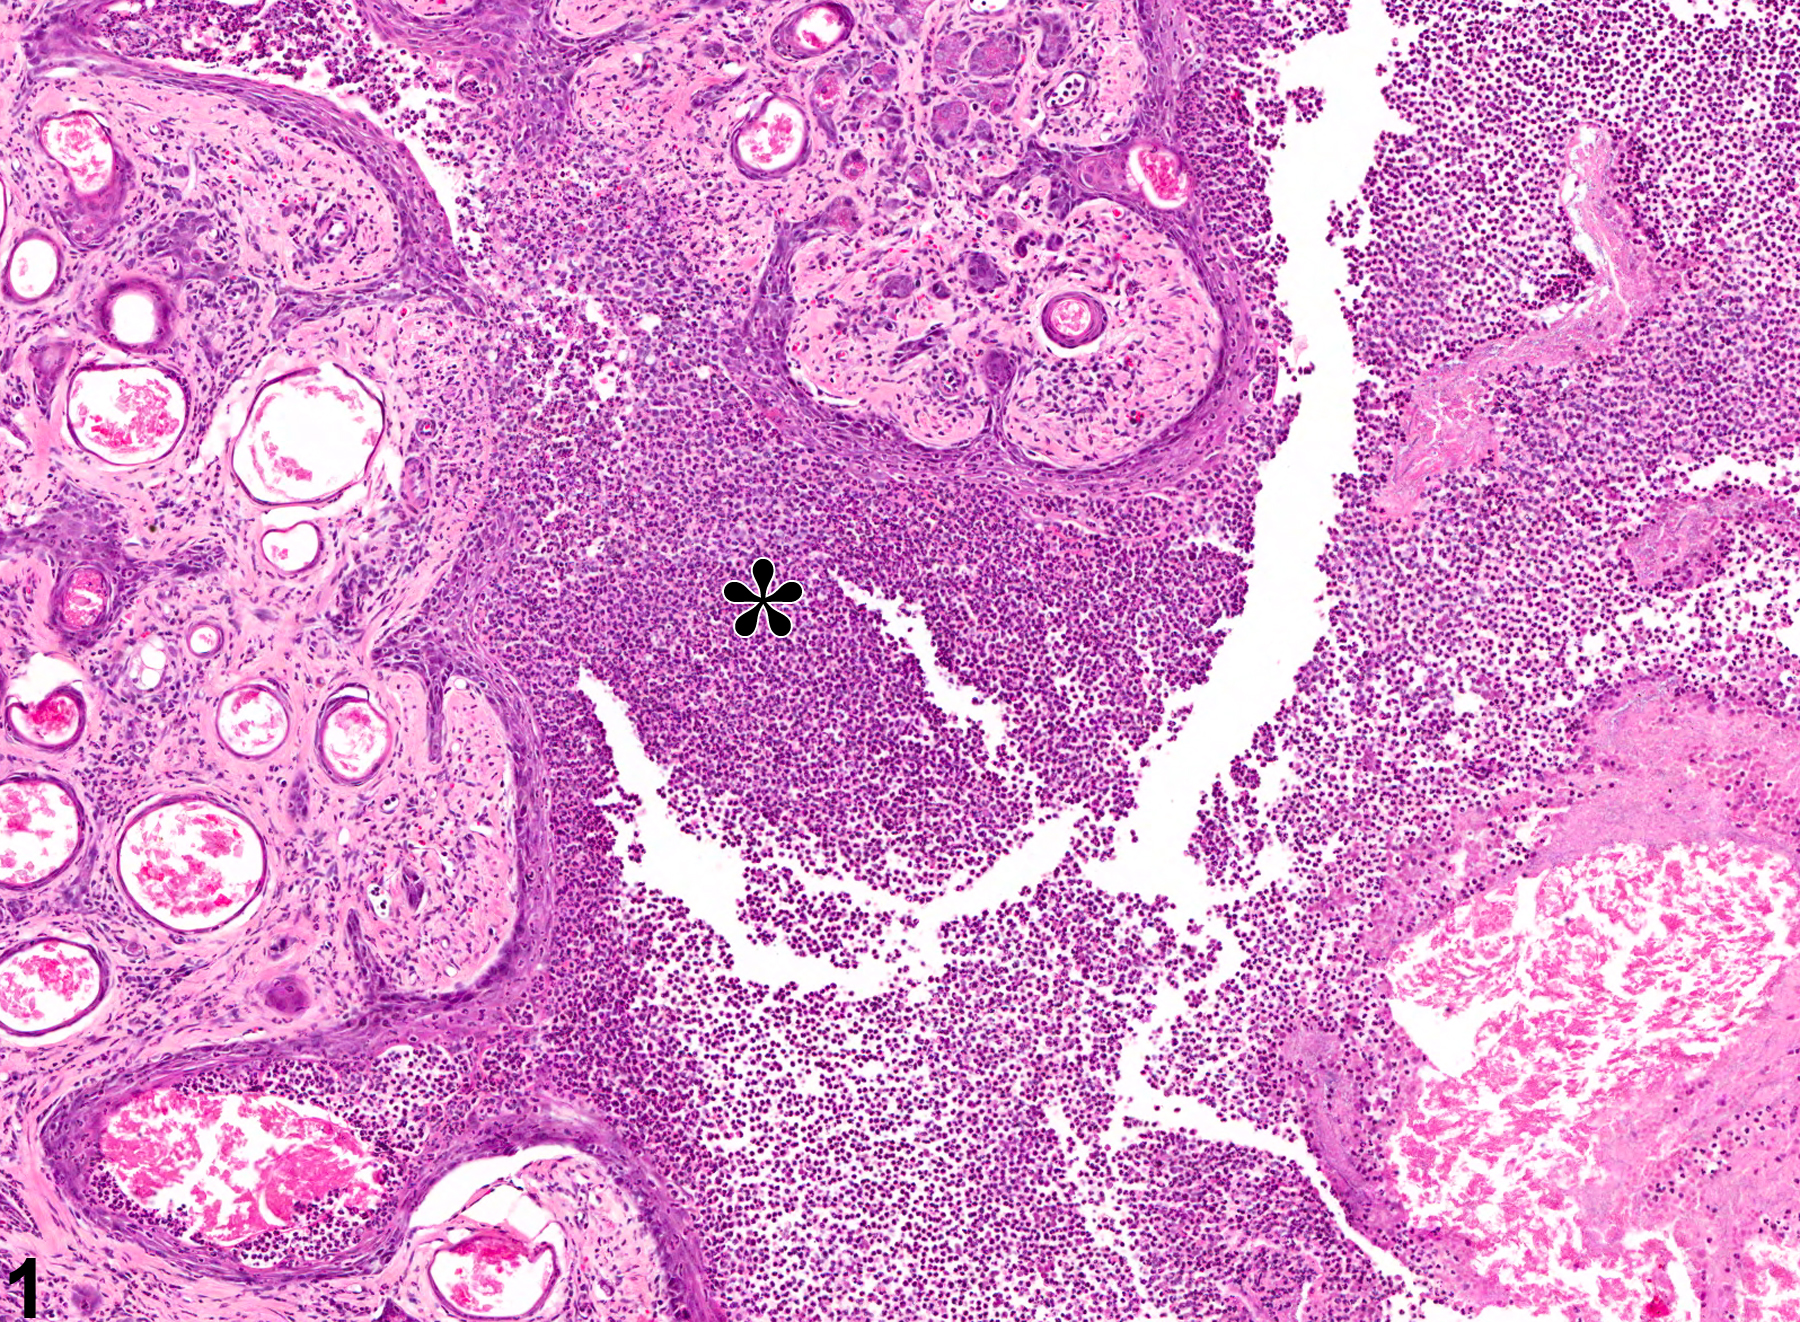 Image of inflammation in the preputial gland from a male F344/N rat in a chronic study